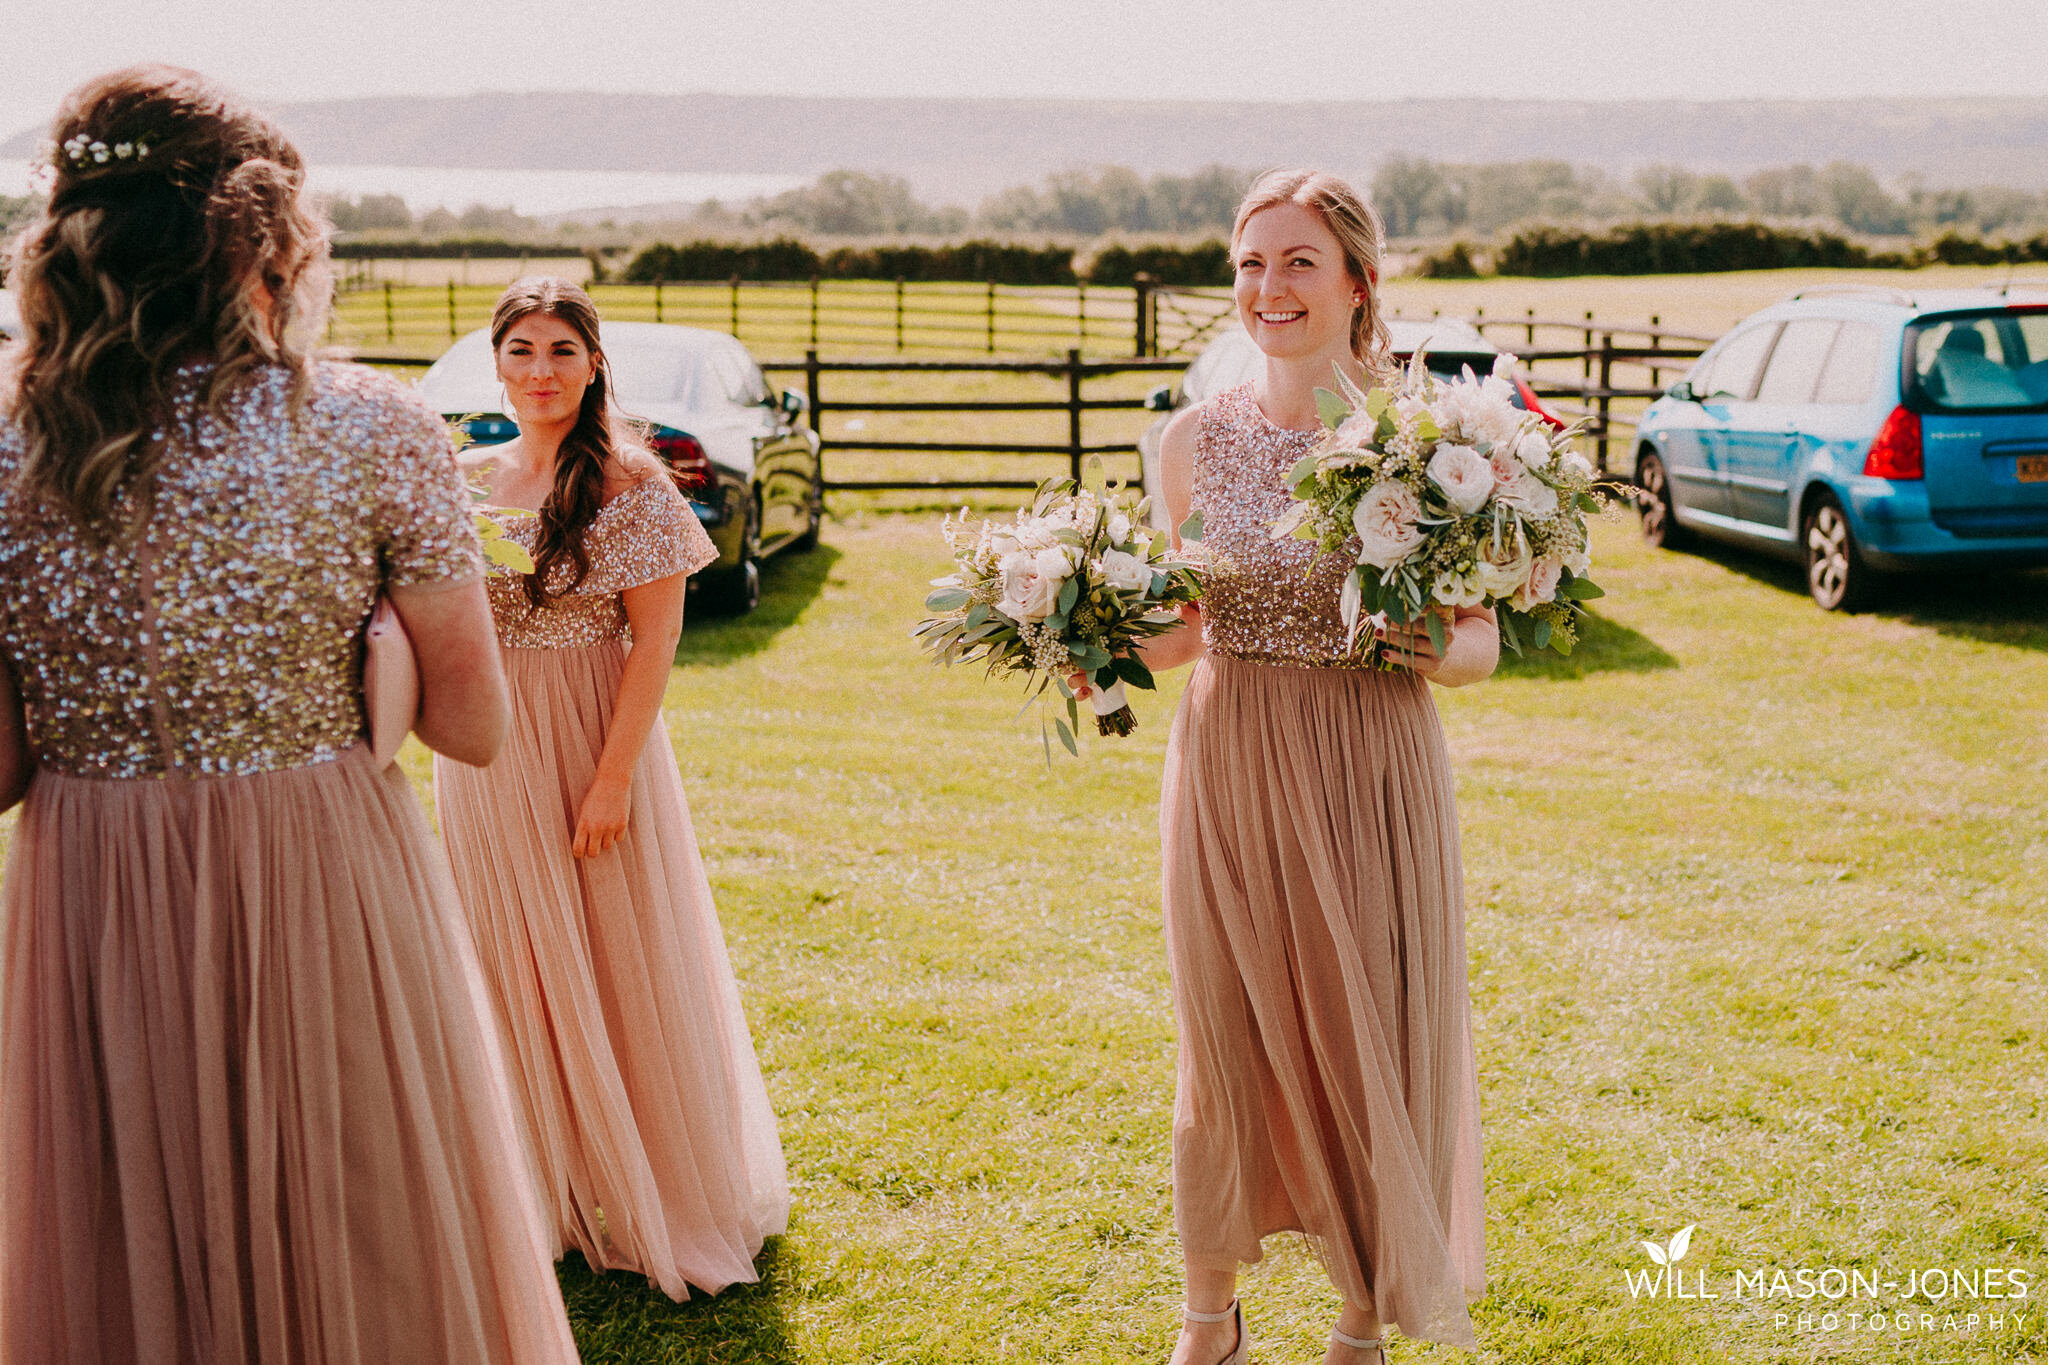  perriswood gower weddings photography colourful documentary 